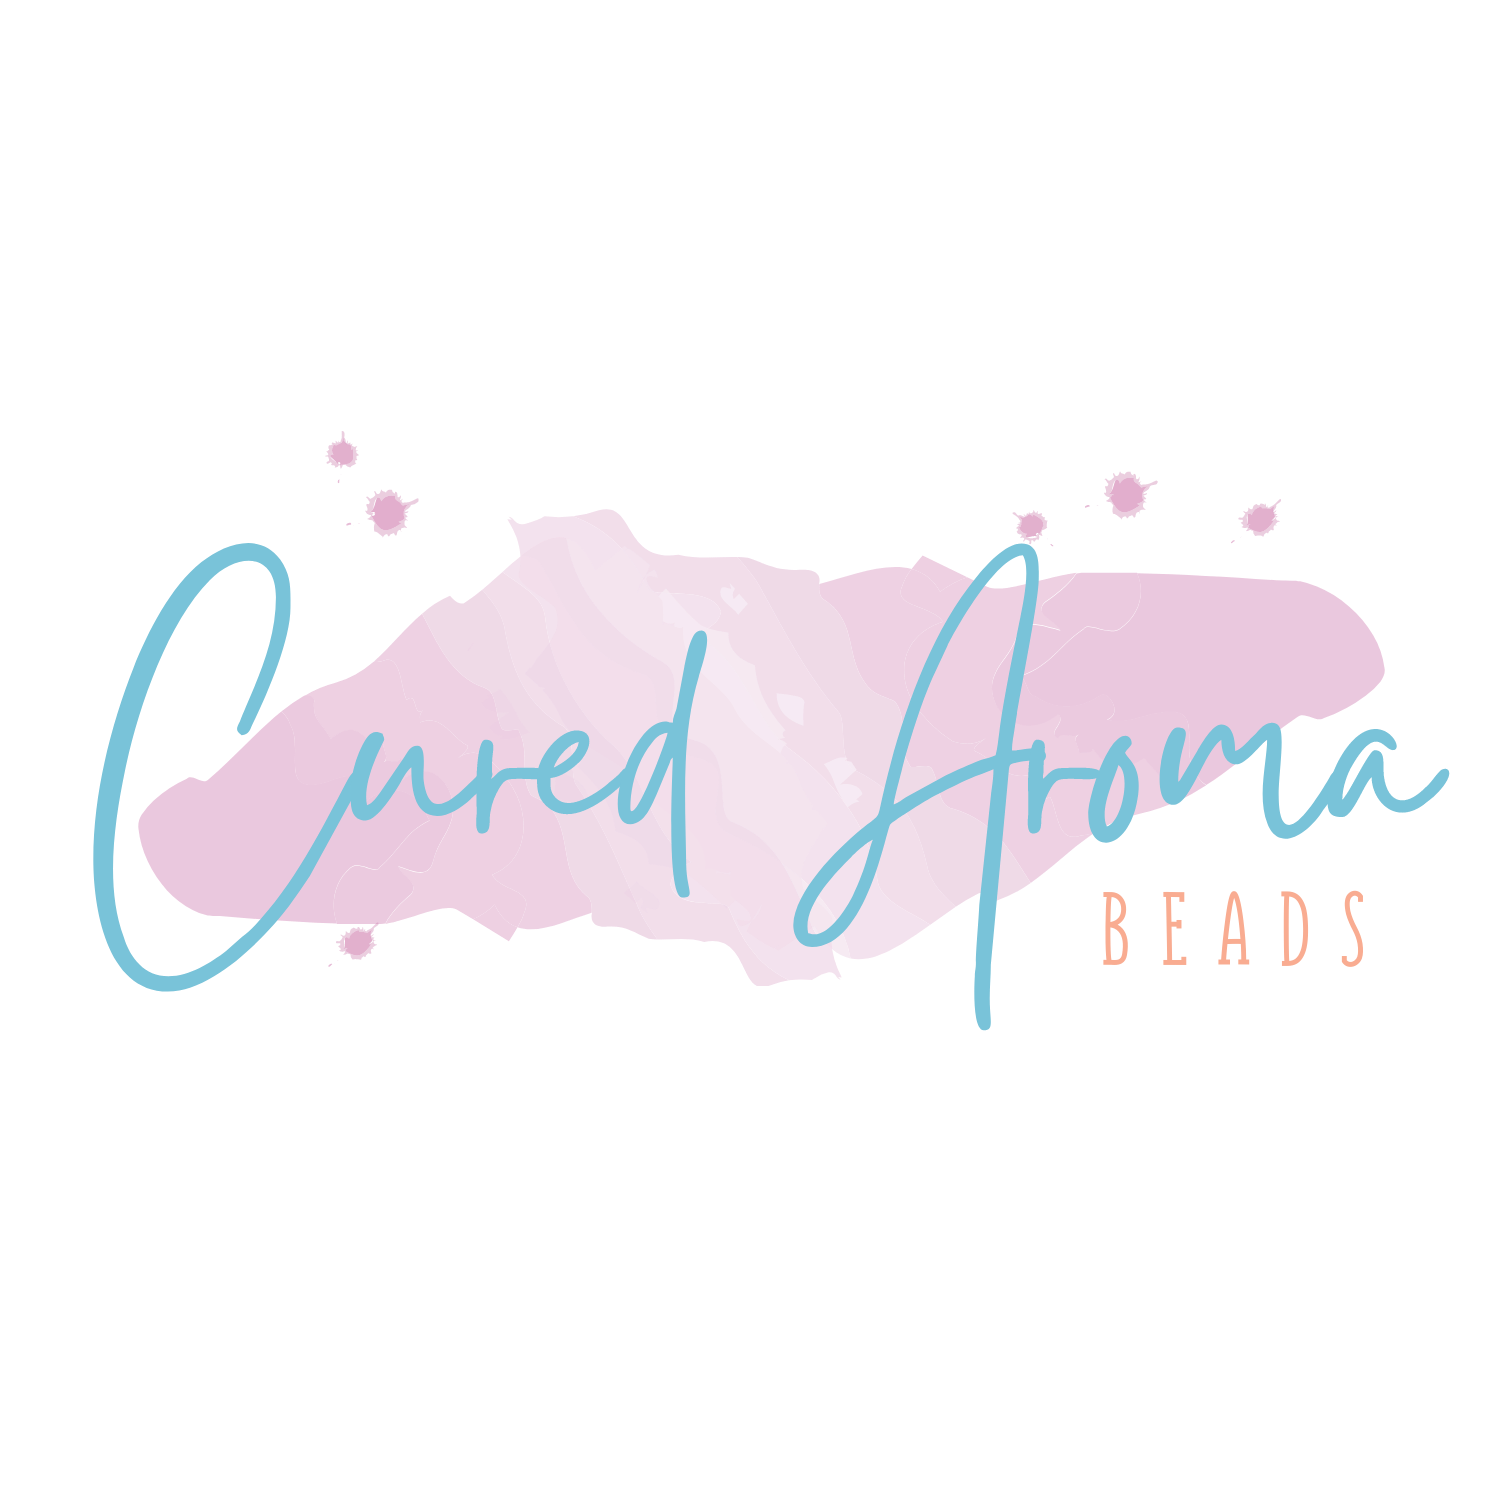 Cured Aroma Beads